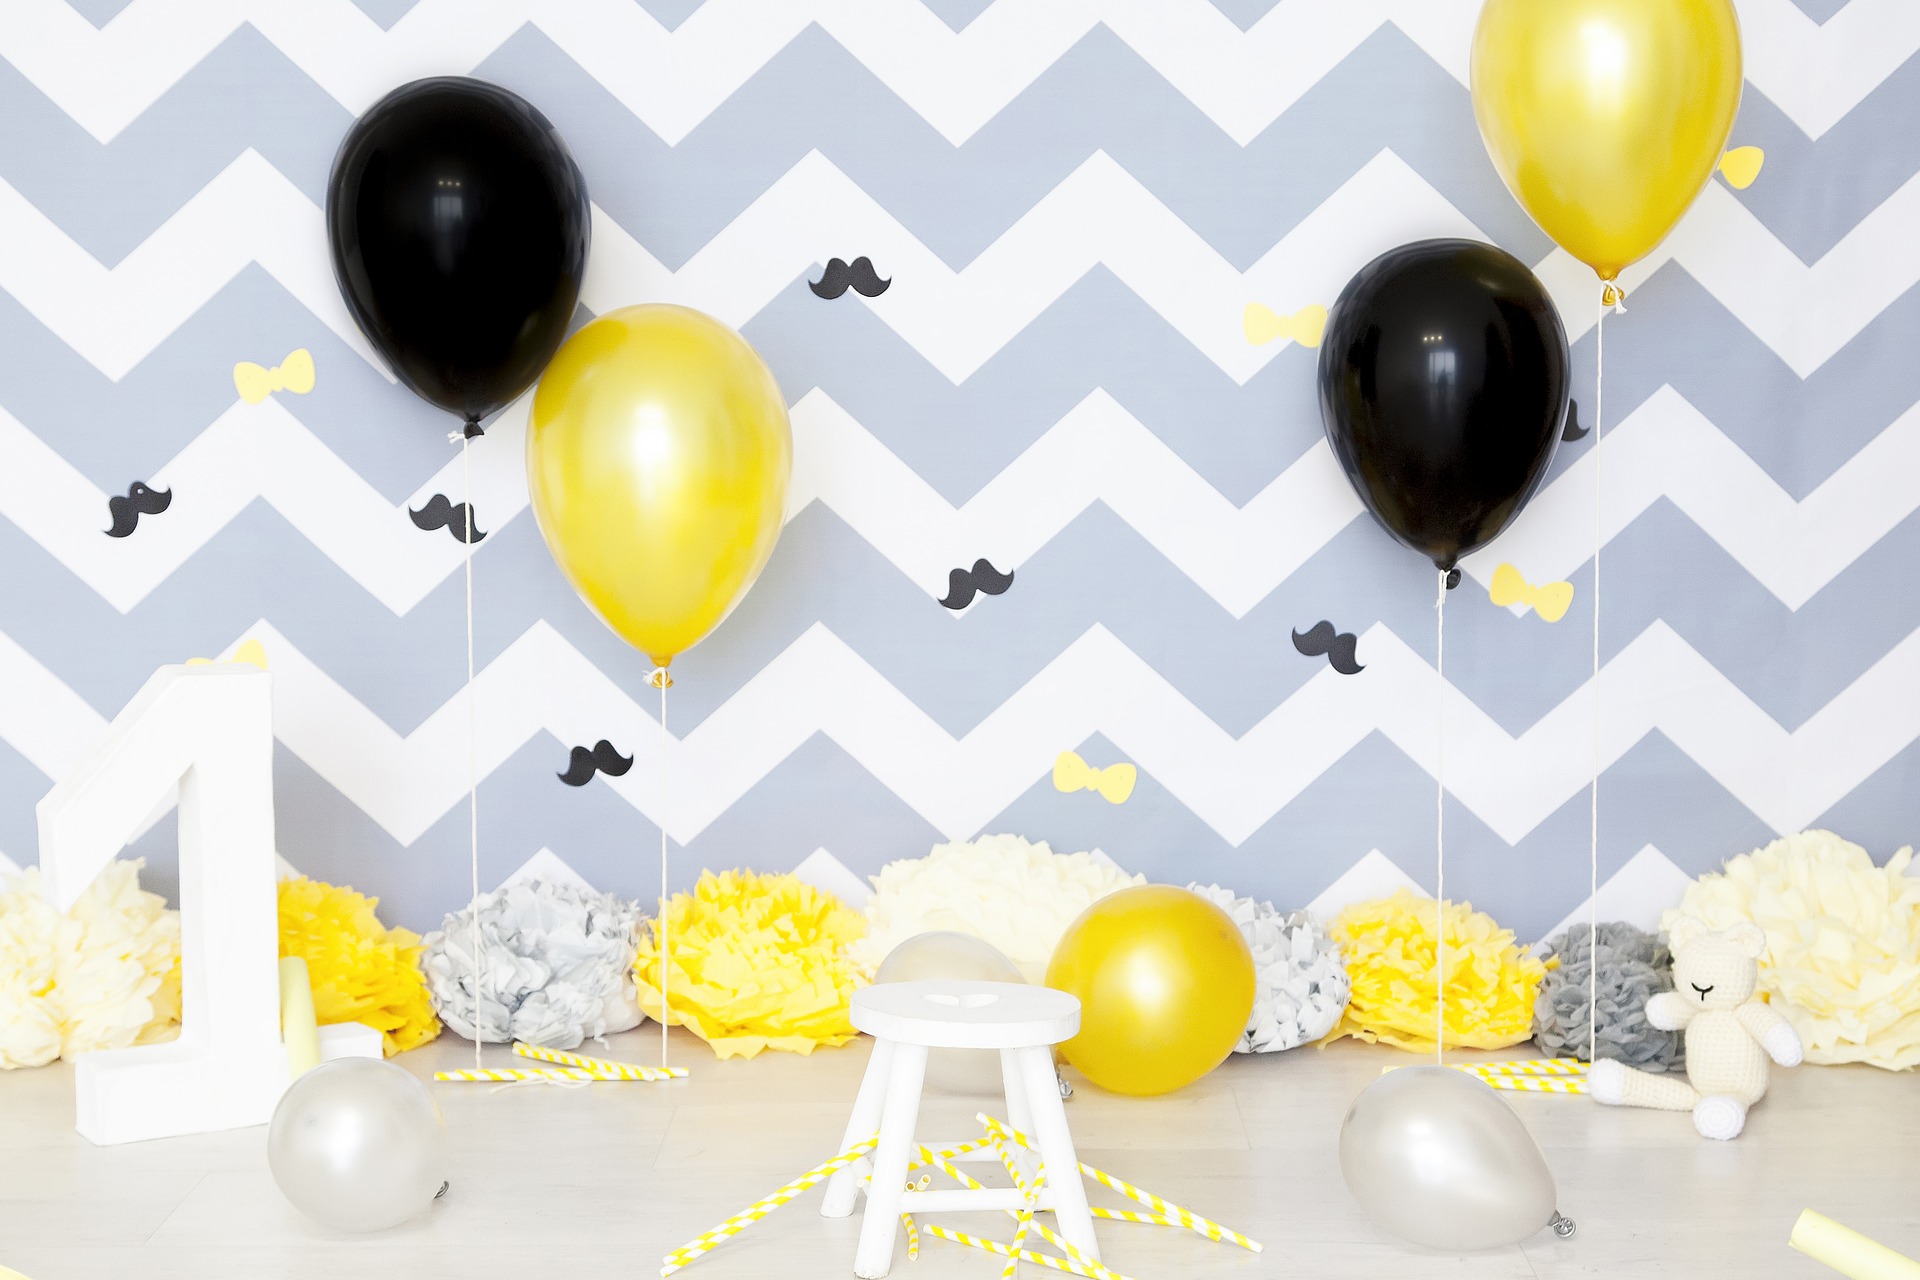 A photo background for a 1 year old's birthday party. Gold and black balloons float in the air, and yellow, gray, and white paper flowers sit on the floor in front of a decorative blue and white zig-zag striped wall.